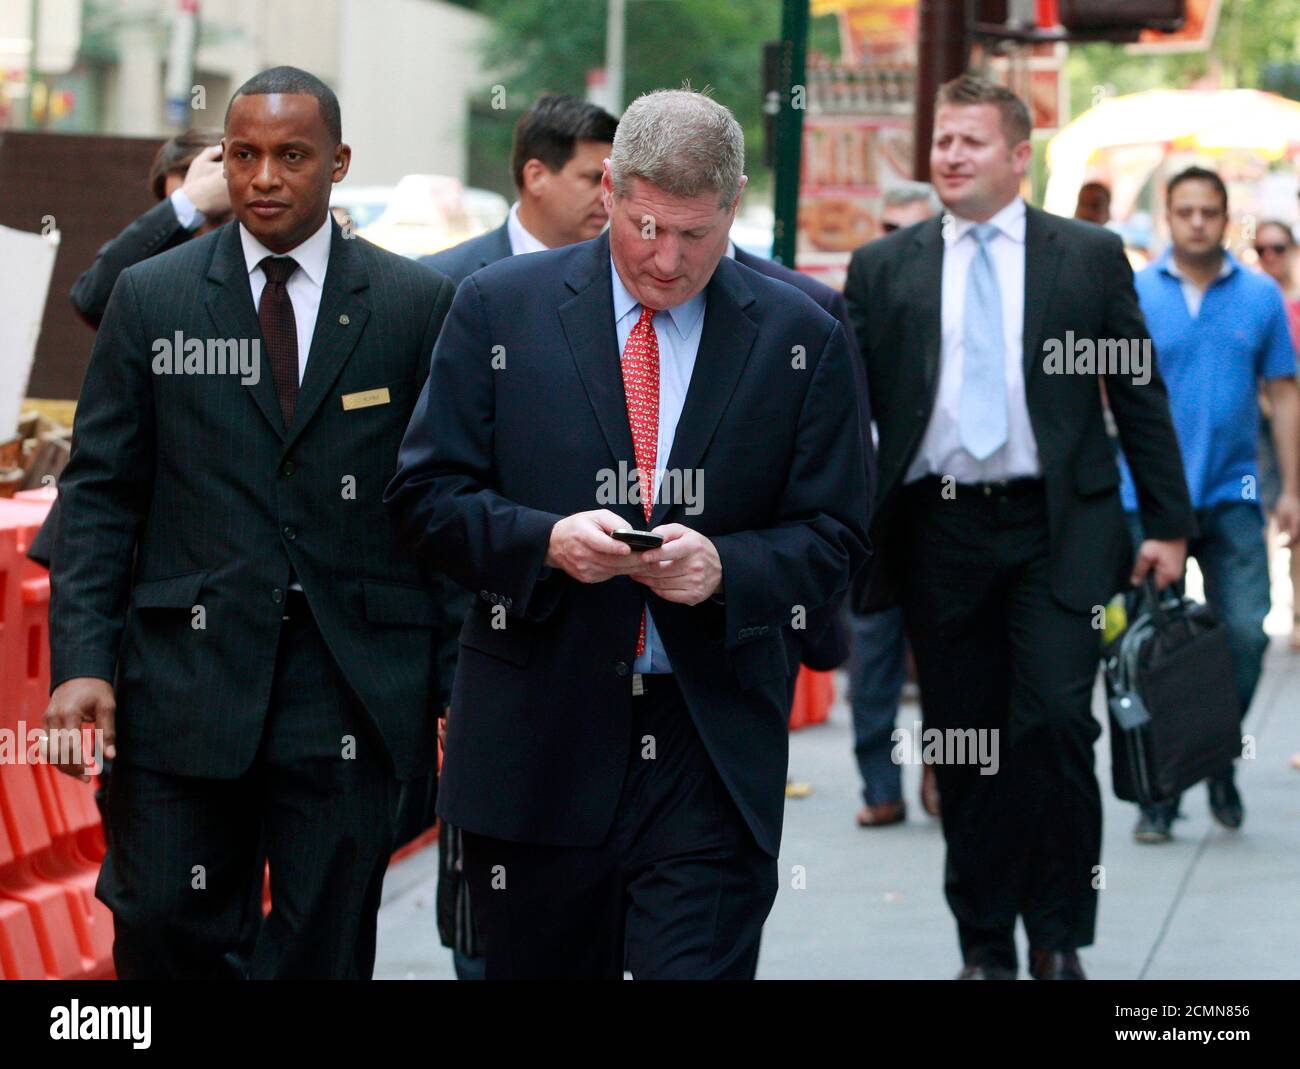 Members of the Manchester United Ltd. road show marketing team exit following their meetings with bankers in New York, August 6, 2012. Manchester United Ltd's owners stand to make about three times their investment in the British soccer club if it successfully goes public. REUTERS/Brendan McDermid (UNITED STATES  - Tags: BUSINESS SPORT SOCCER) Stock Photo